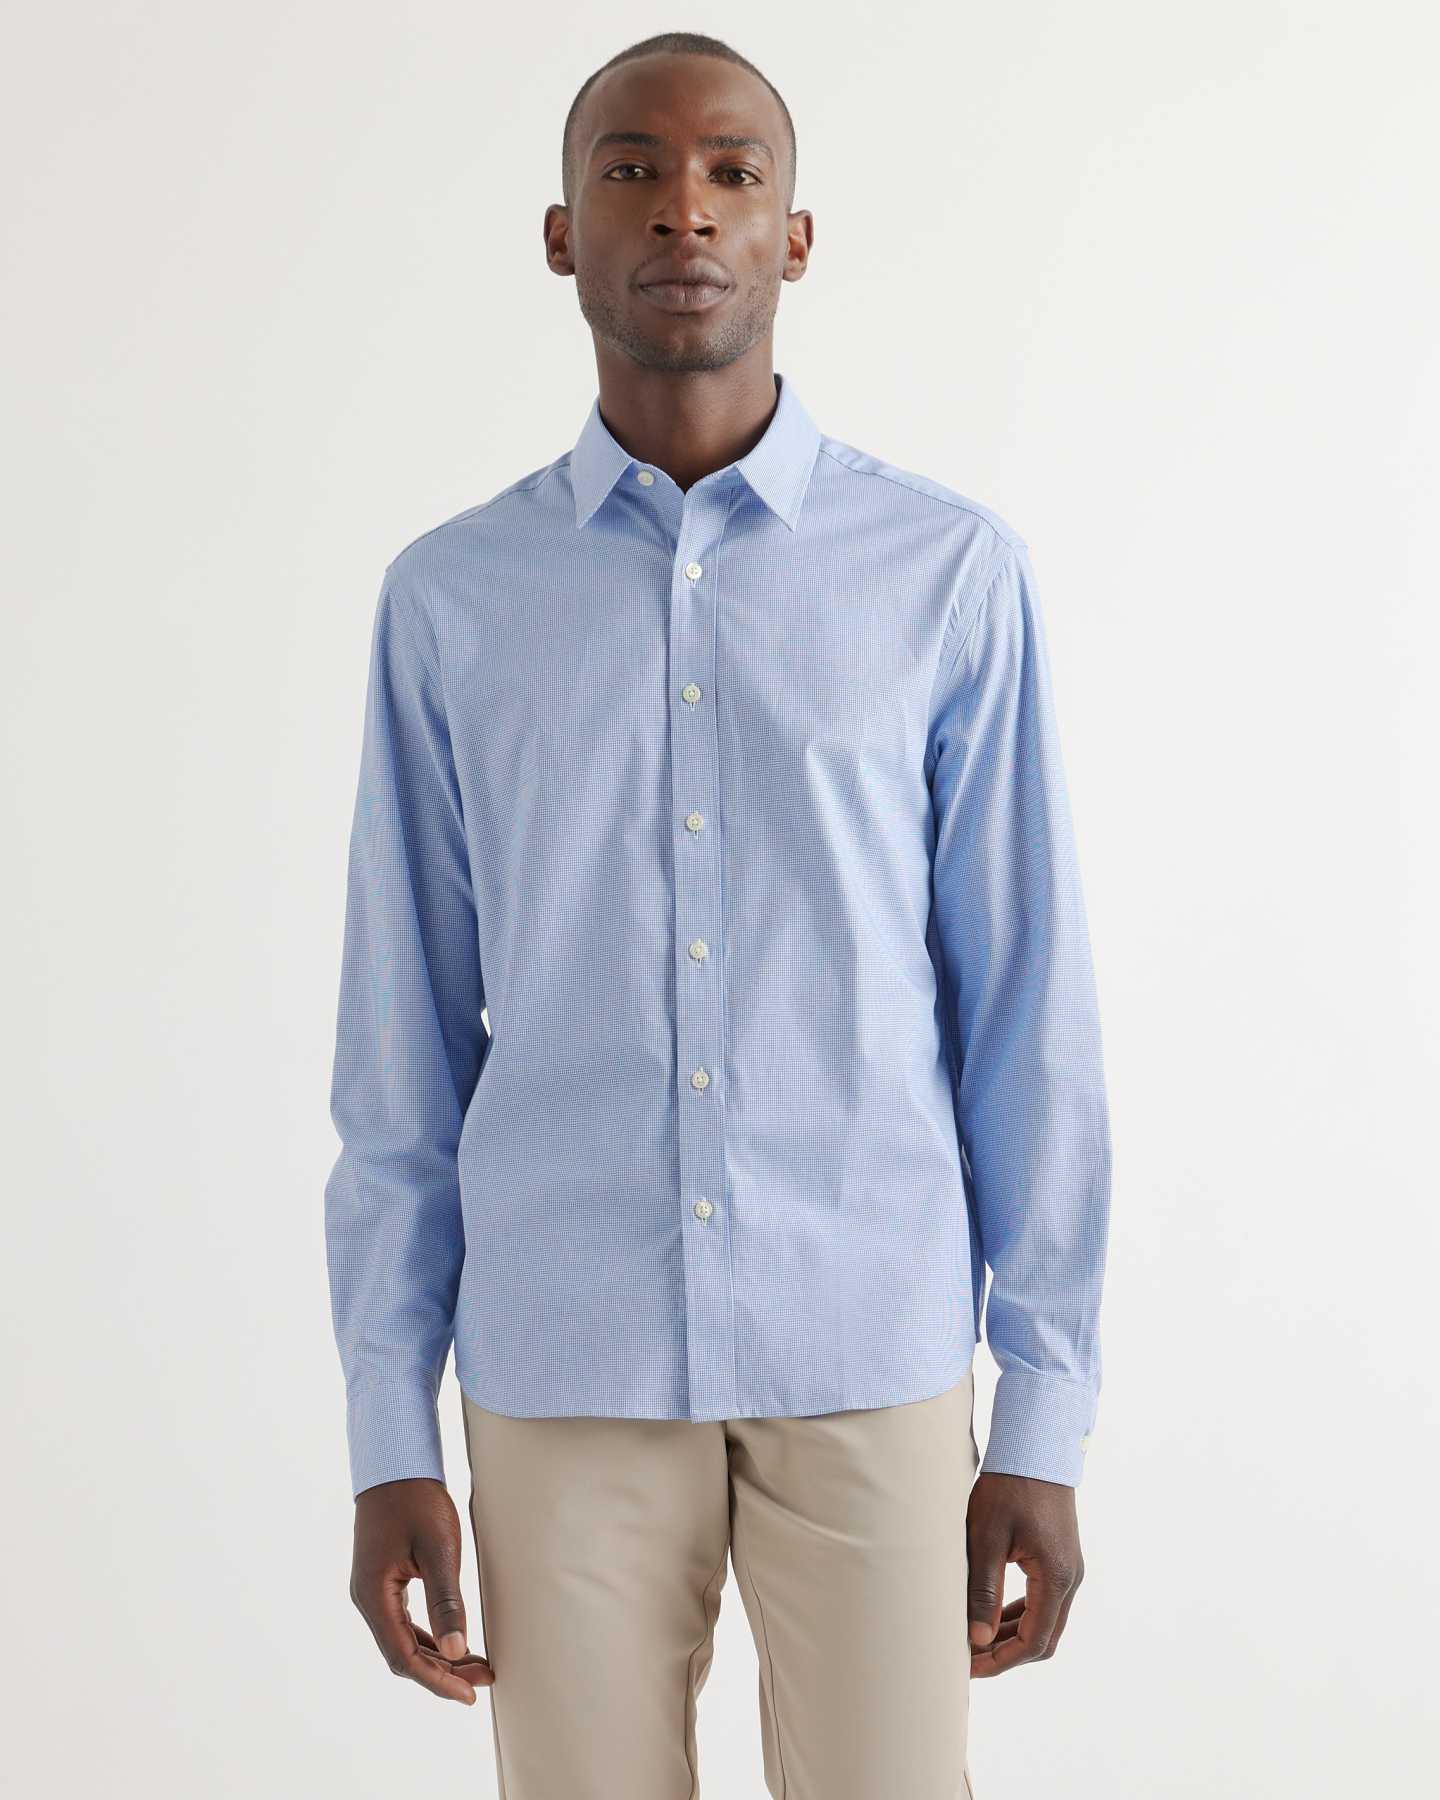 The Untucked Dress Shirt - Admiral Blue Pin Pattern - 19